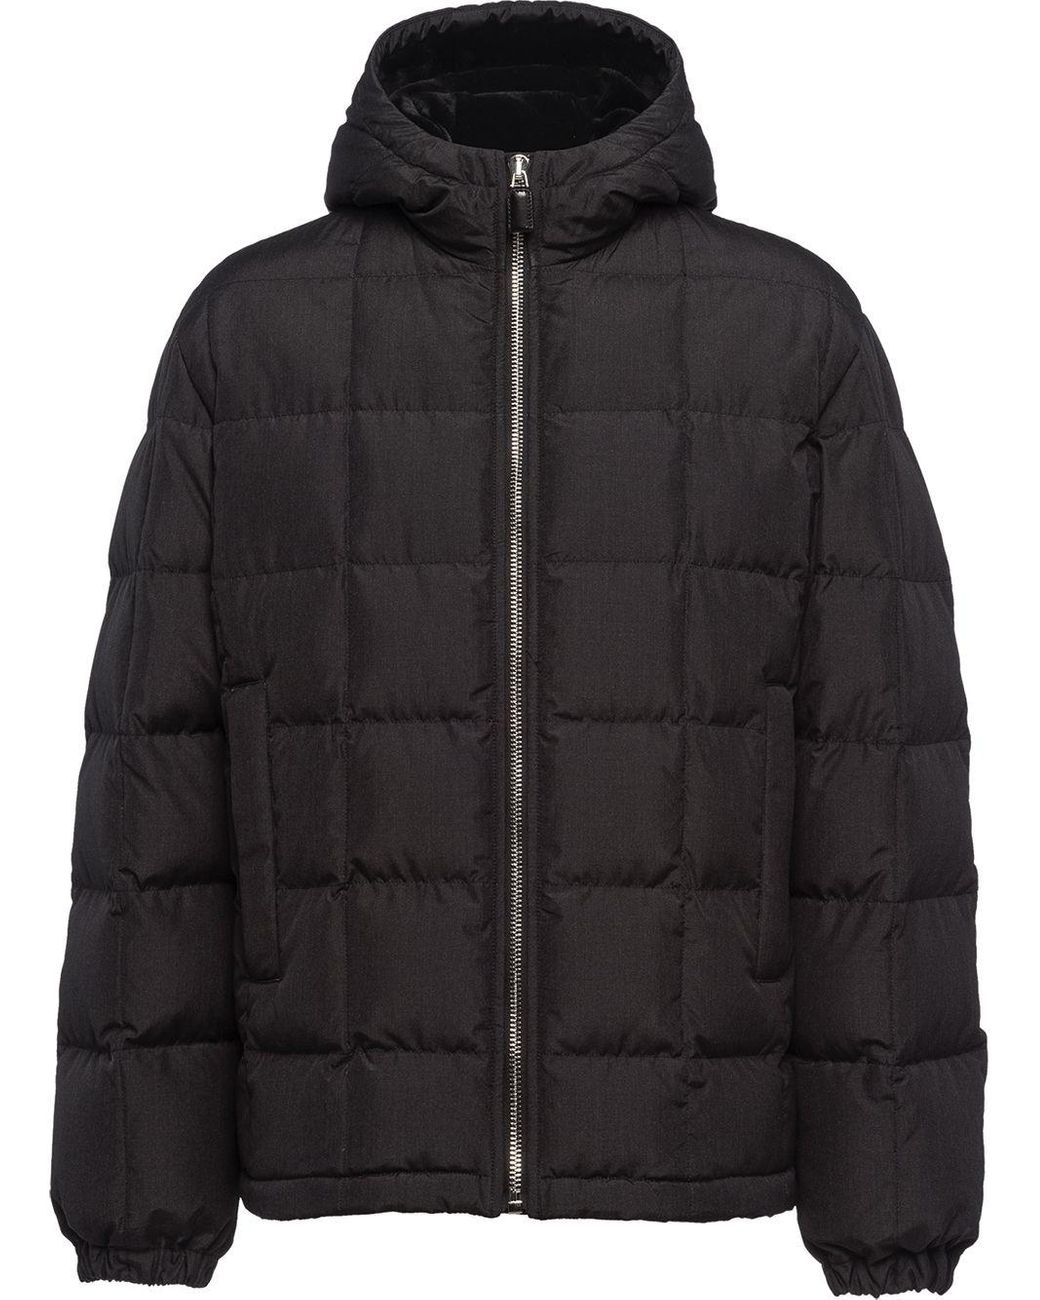 Prada Silk Quilted Hooded Puffer Jacket in Grey (Gray) for Men - Lyst